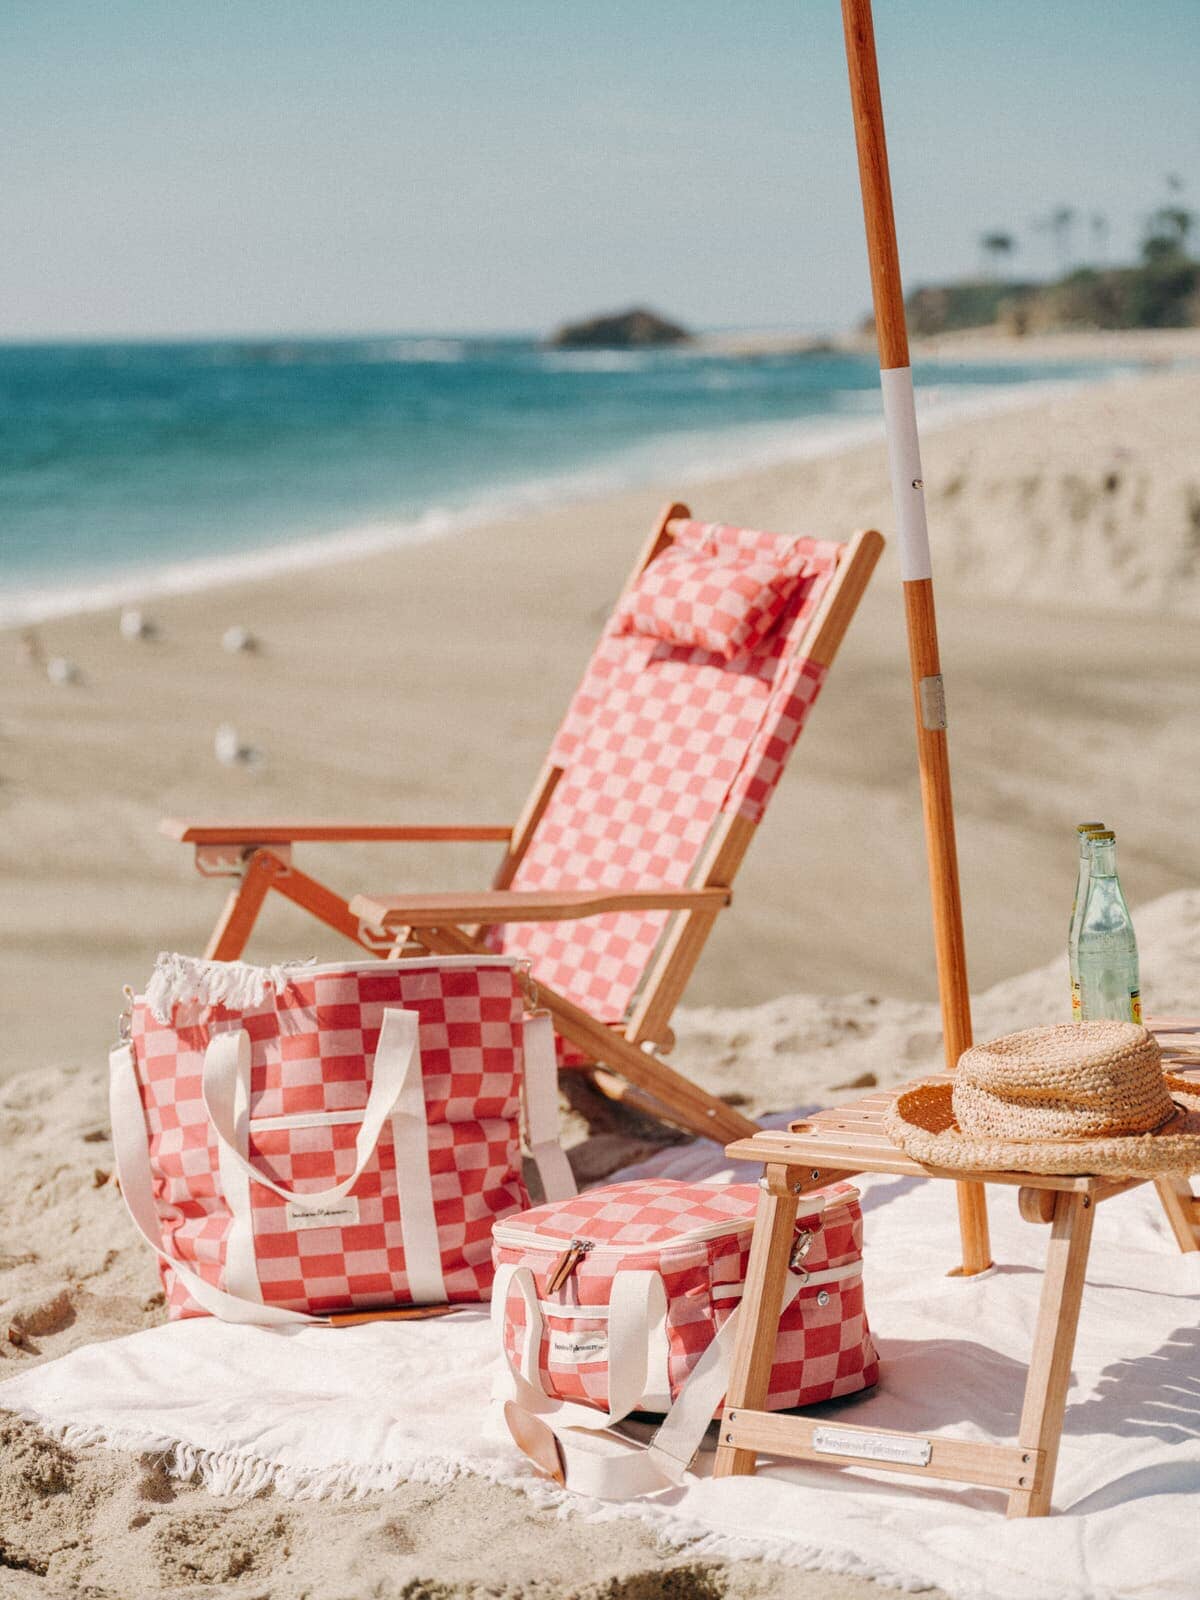 Beach setting with sirenuse chair and accessories